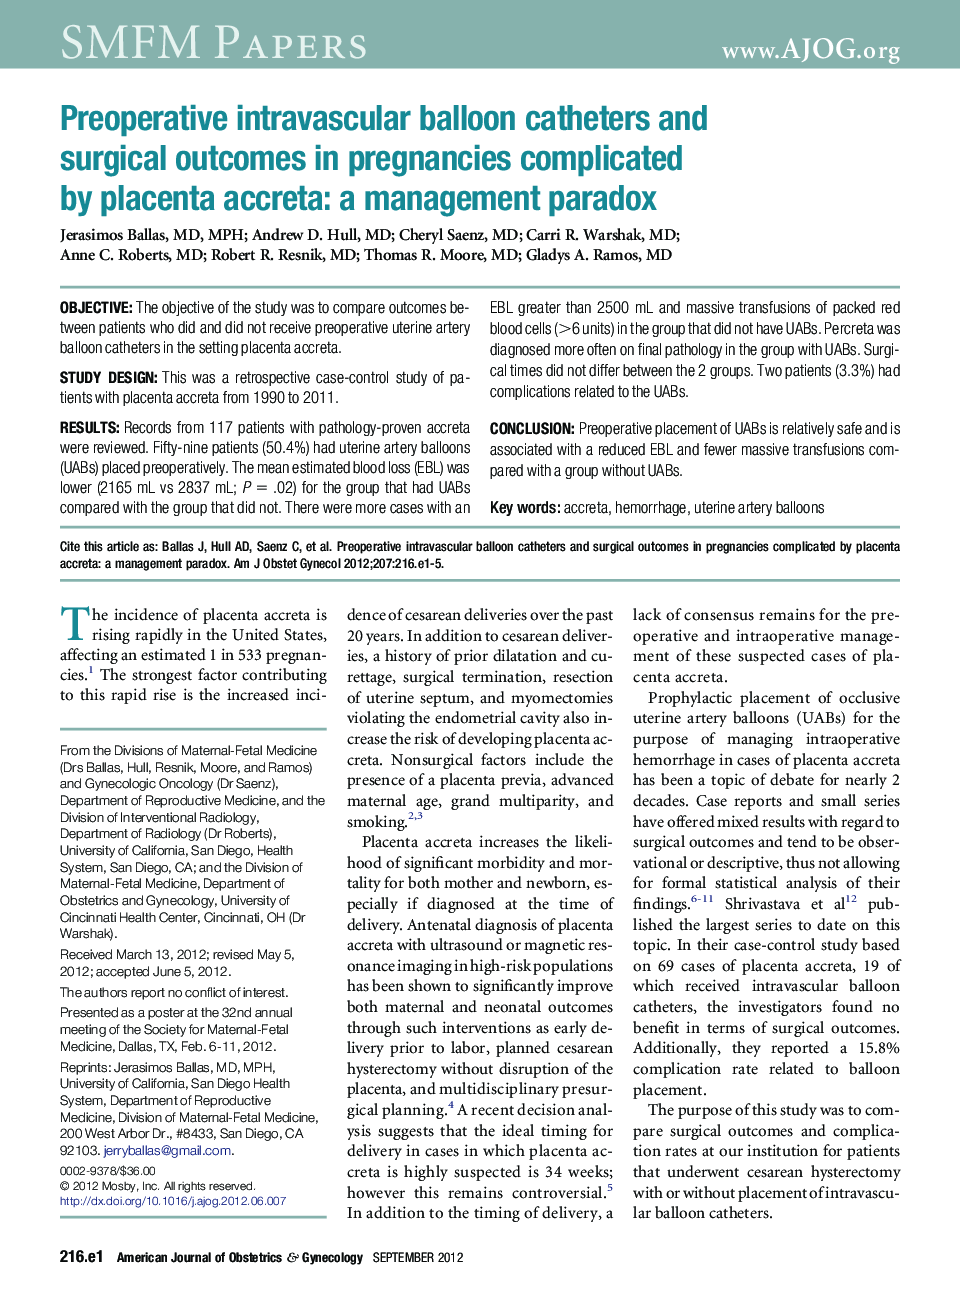 Preoperative intravascular balloon catheters and surgical outcomes in pregnancies complicated by placenta accreta: a management paradox